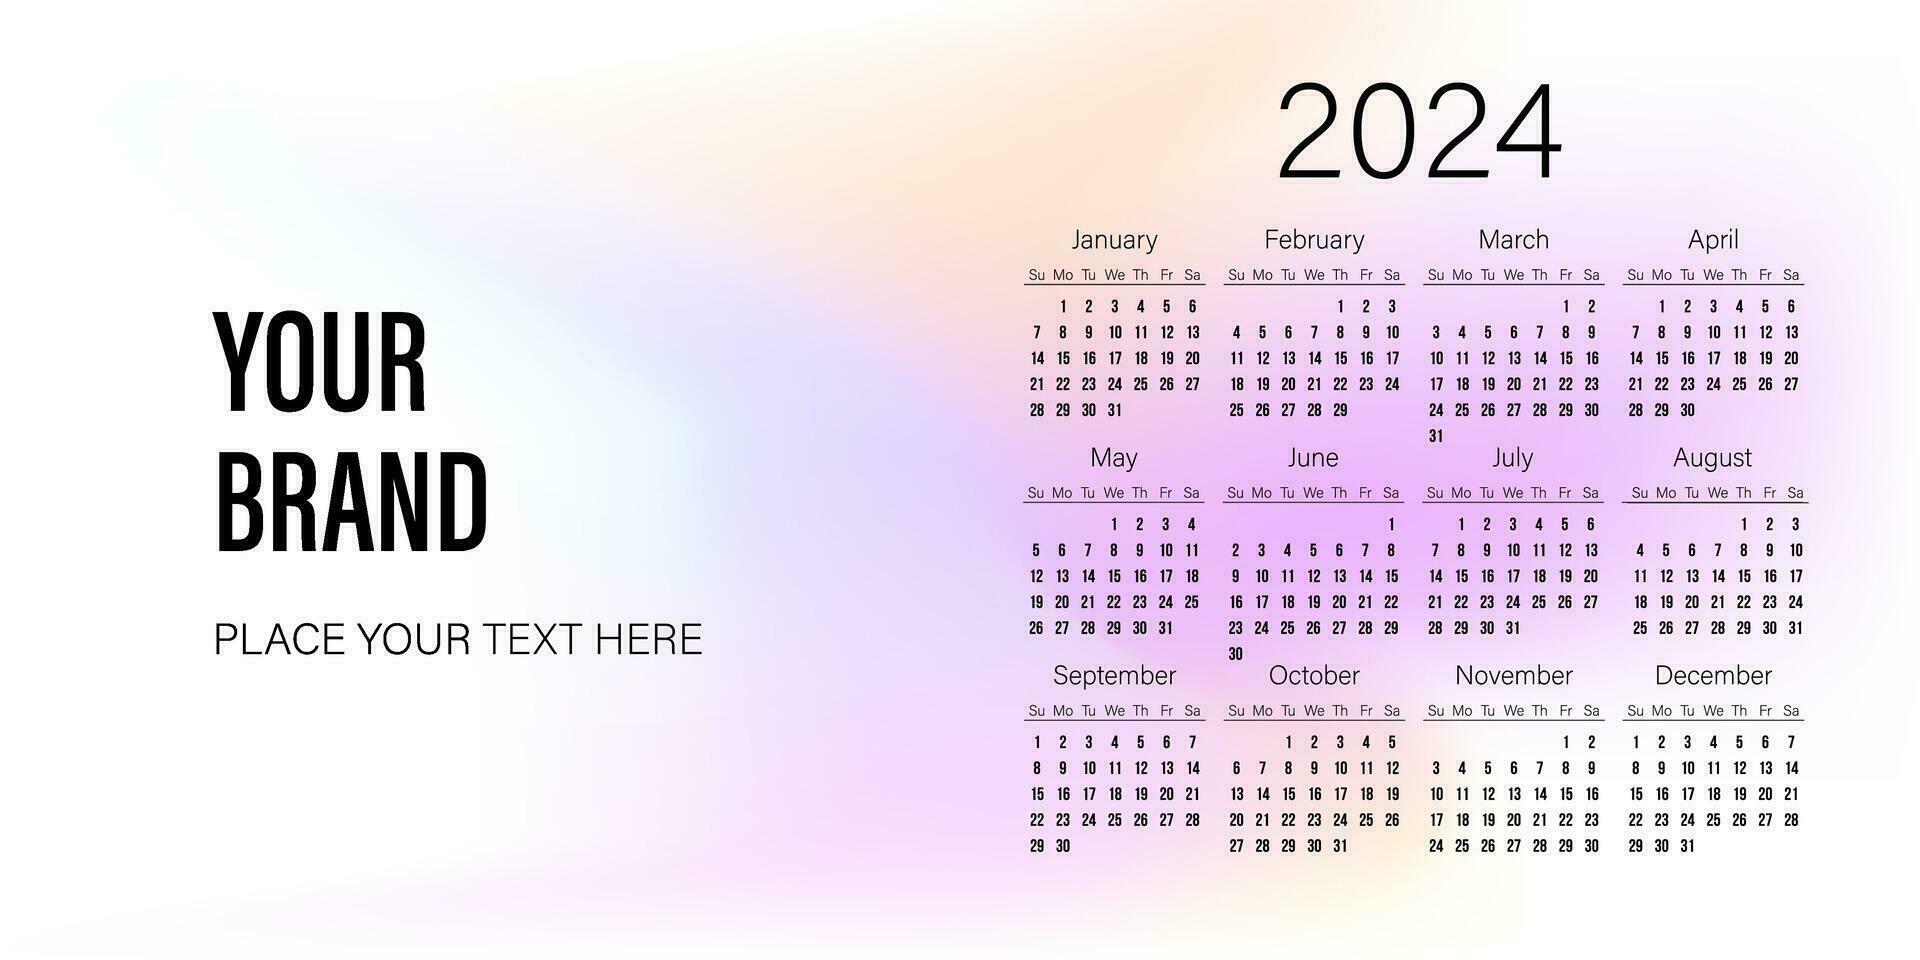 Horizontal calendar 2024 template design on light colorful background for your brand project vector